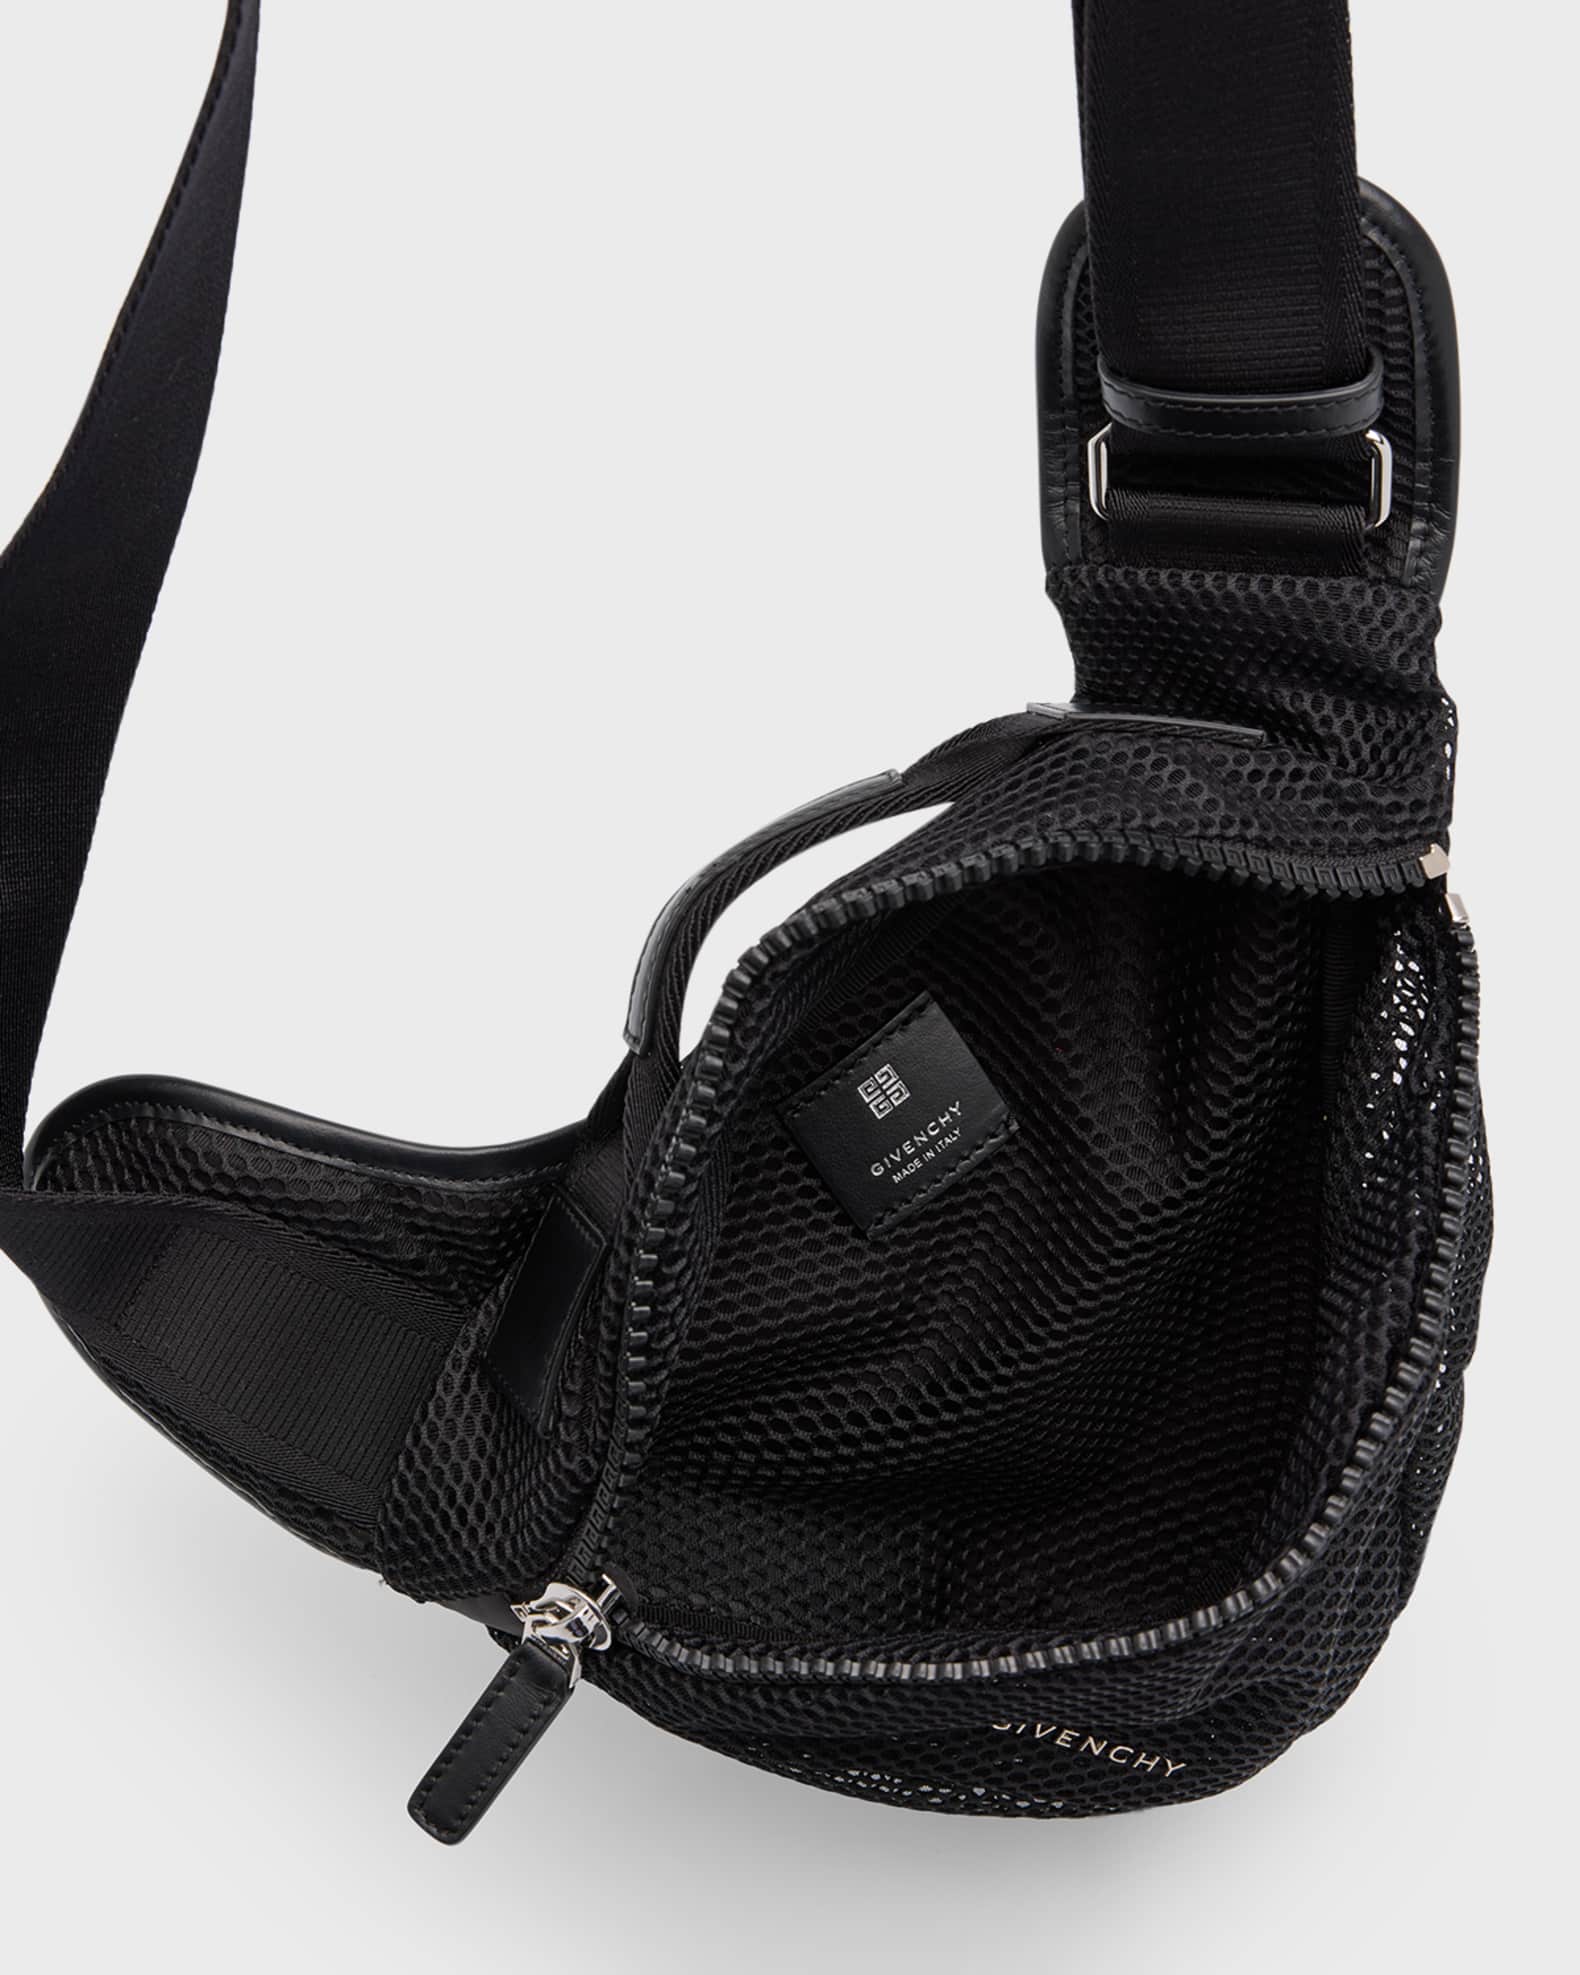 Givenchy Gray Small G-Zip Triangle Bag